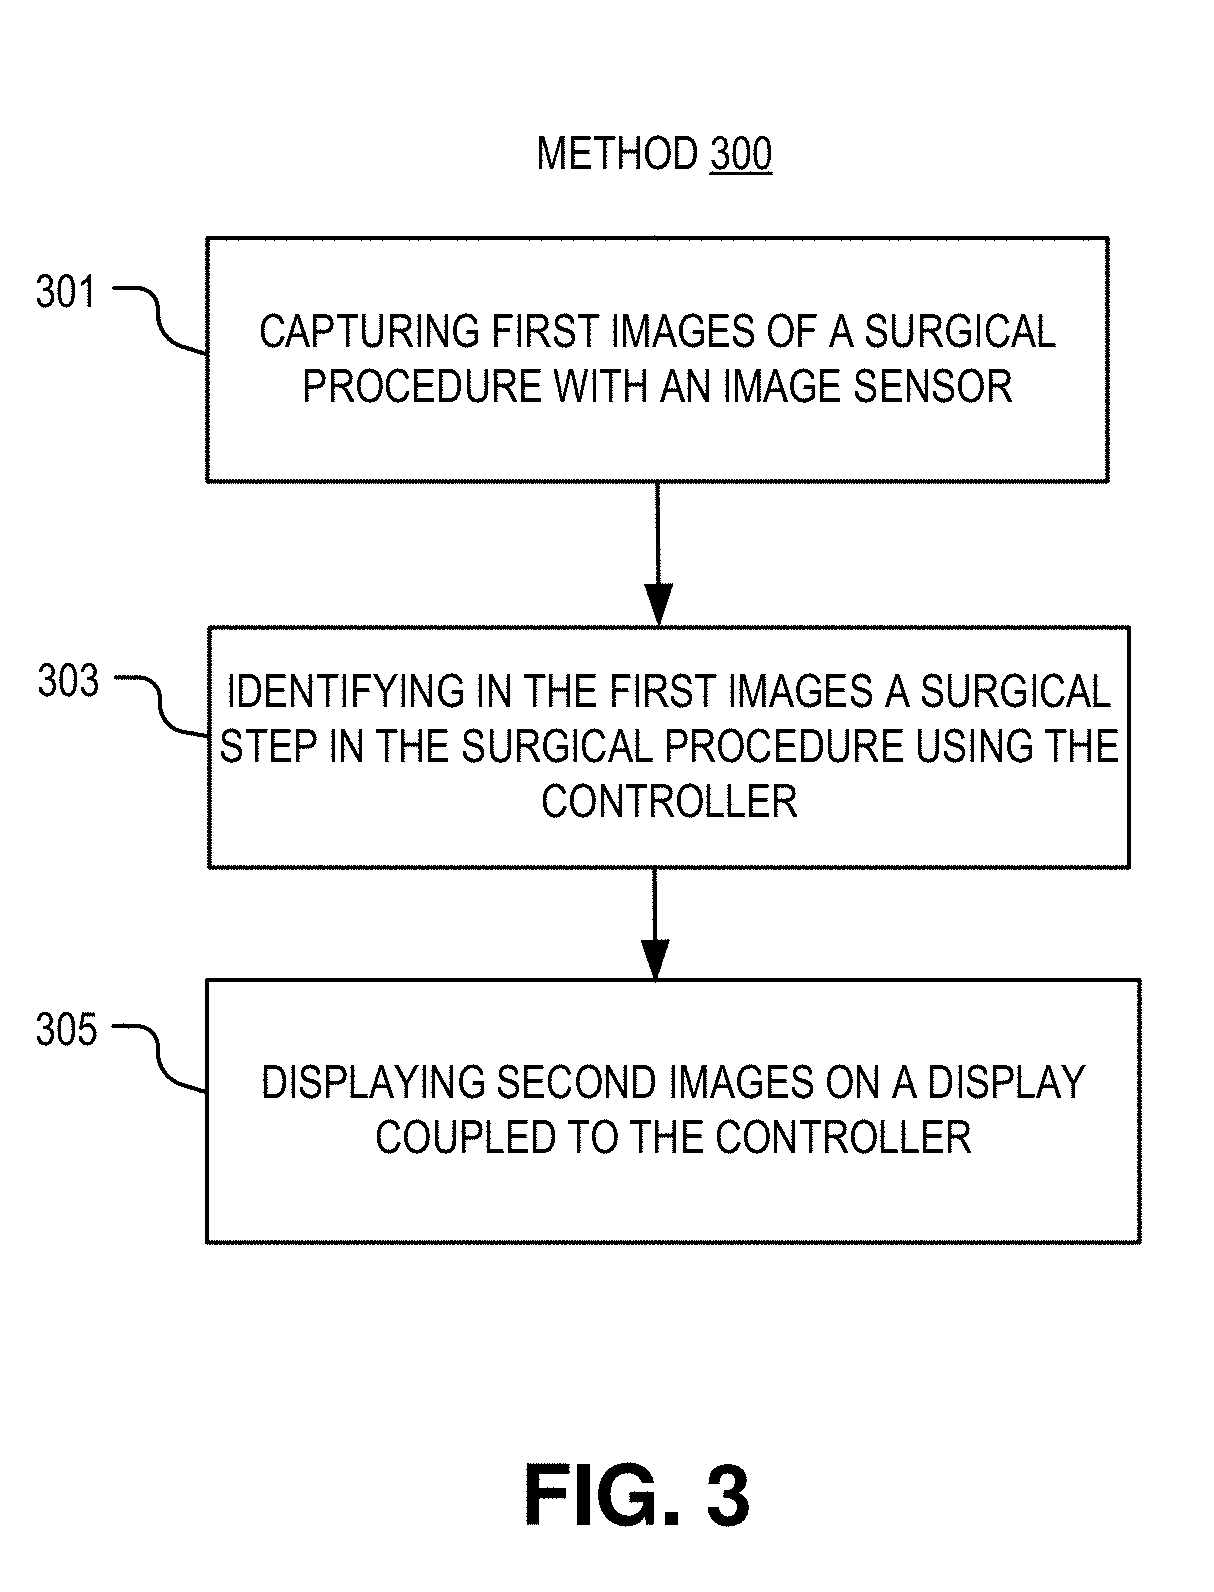 Step-based system for providing surgical intraoperative cues